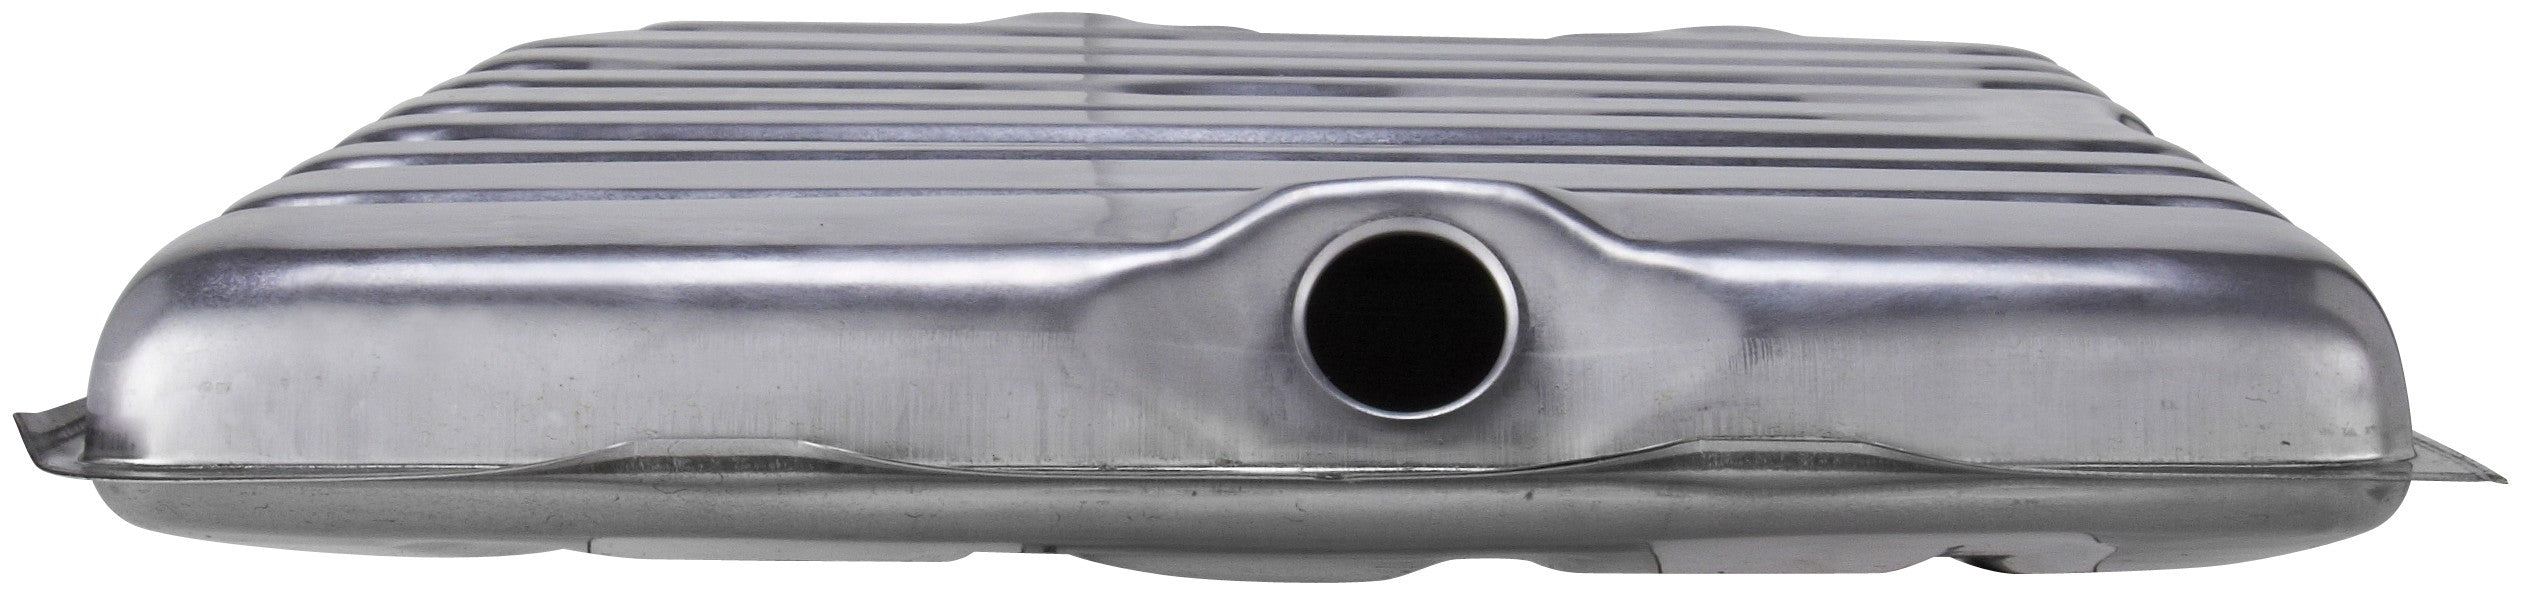 Fuel Tank for Plymouth Fury II 1973 1972 1971 1970 1969 1968 1967 - Spectra CR20A